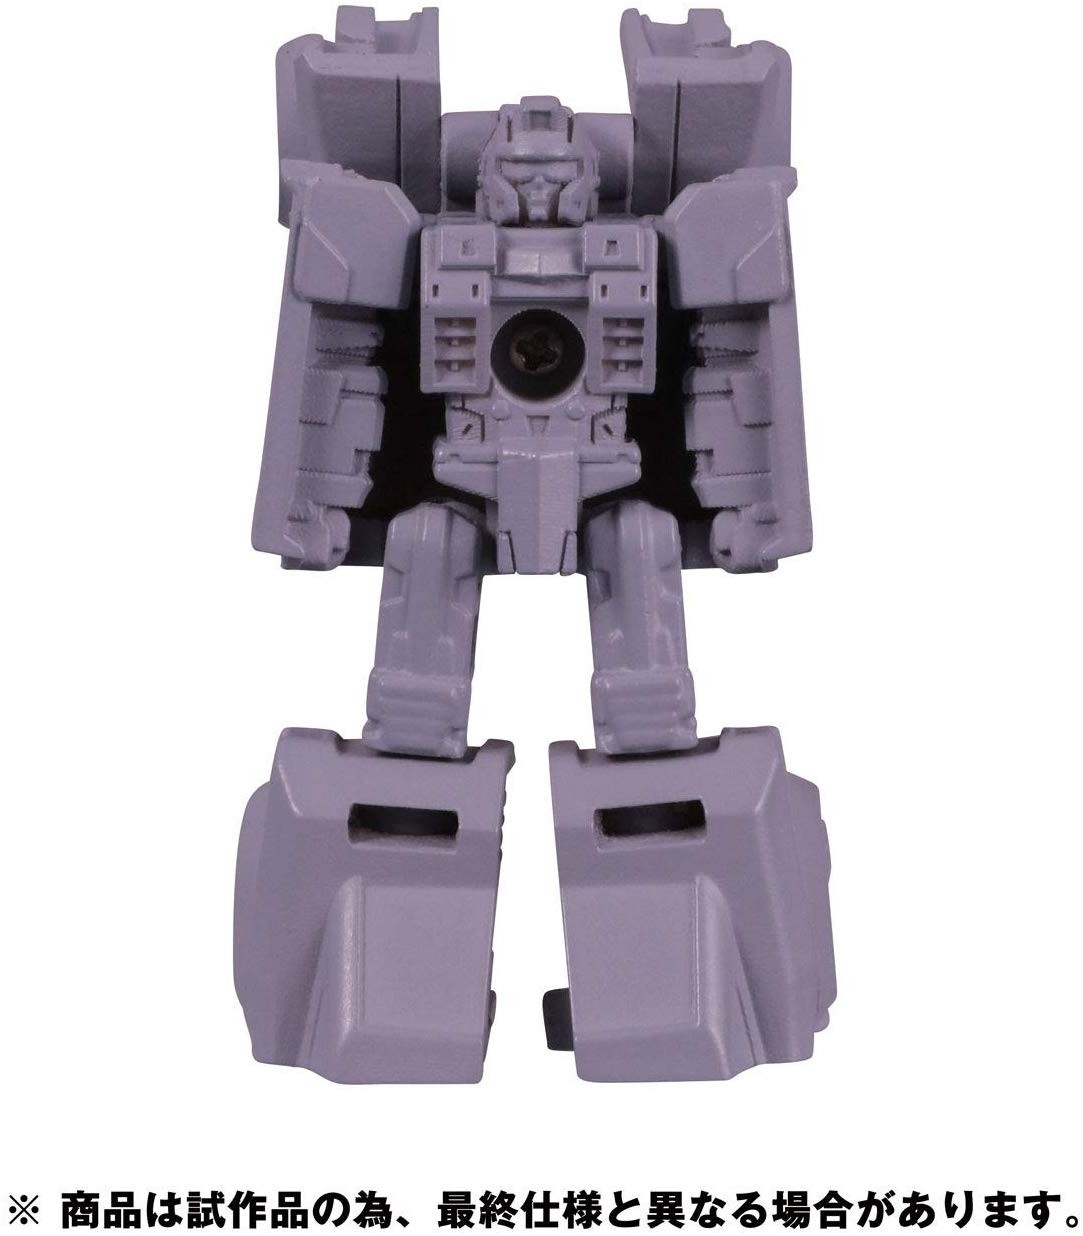 Transformers News: New Grey Prototype Pictures for Transformers Siege Soundwave, Prowl and more